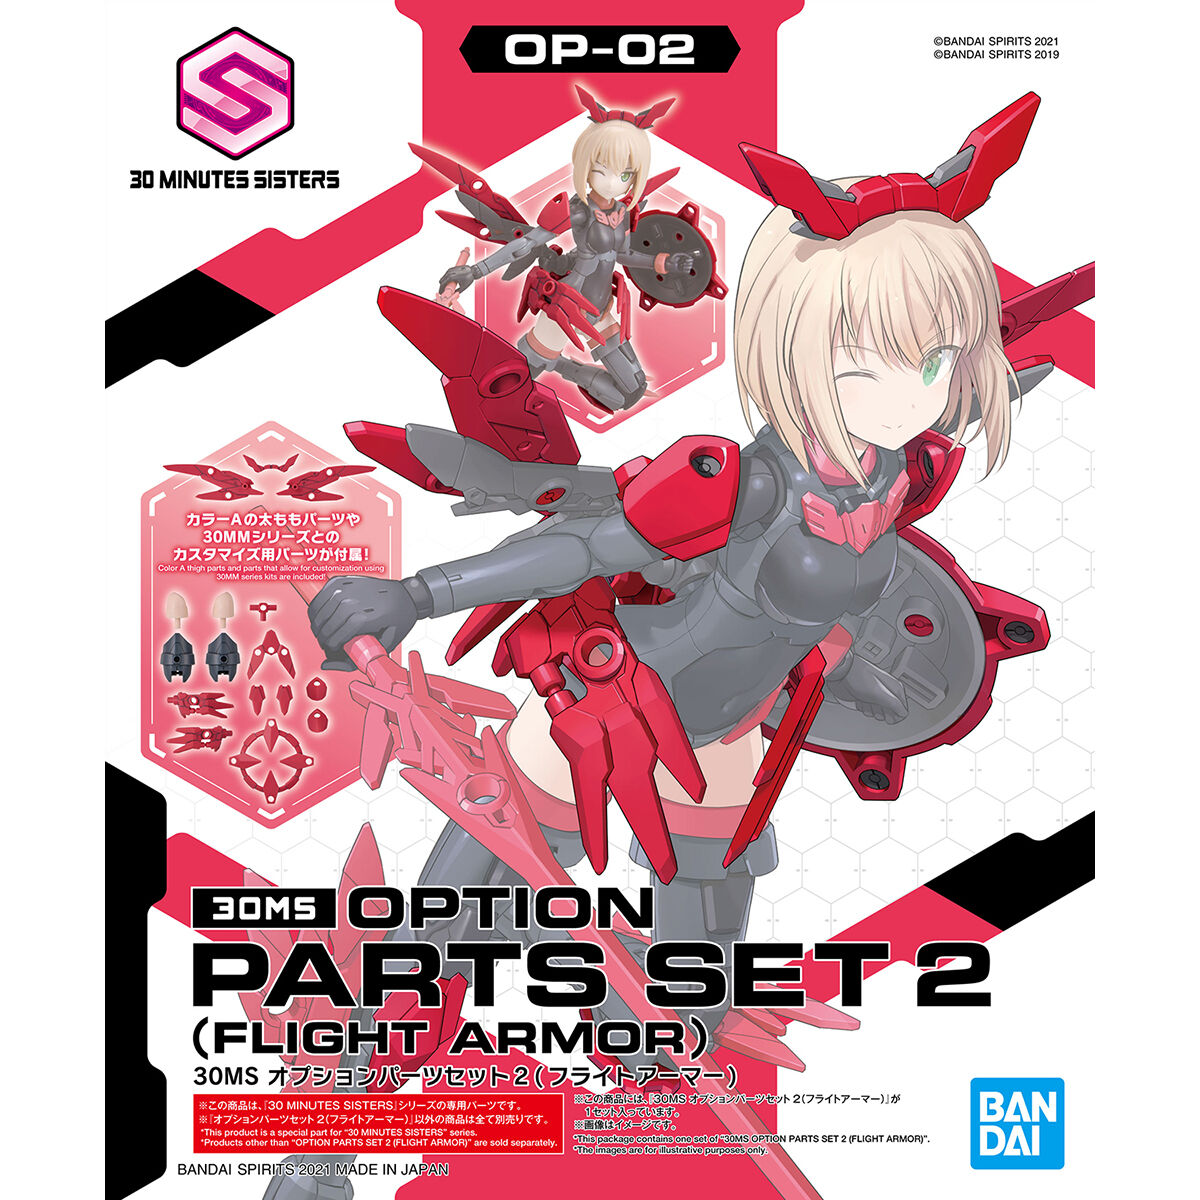 Option Parts 2 (Flight Armour) 30 Minutes Sisters Accessory Model Kit #5061922 by Bandai